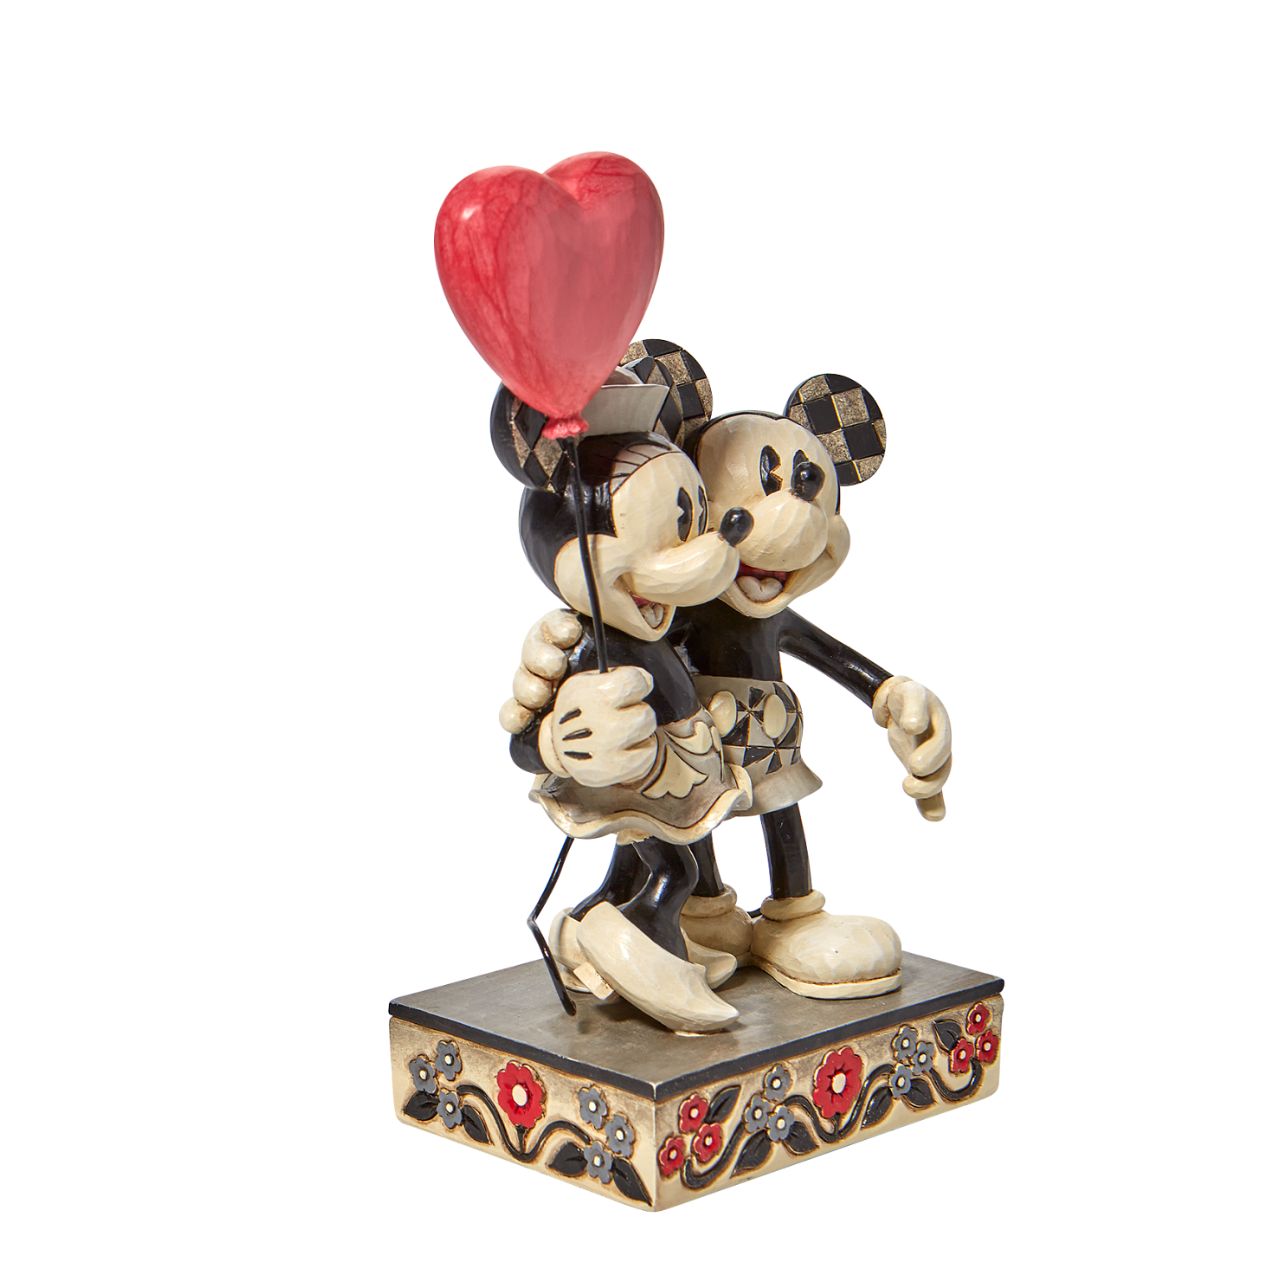 Jim Shore Disney Mickey and Minnie Heart Figurine  "Love is in the Air" Celebrate love with the original Disney couple with this sweet relief by Jim Shore. Mickey Mouse hugs his girl close in this romantic figurine with classic Jim Shore rosemaling. Minnie holds on tight to a heart balloon and her valentine.